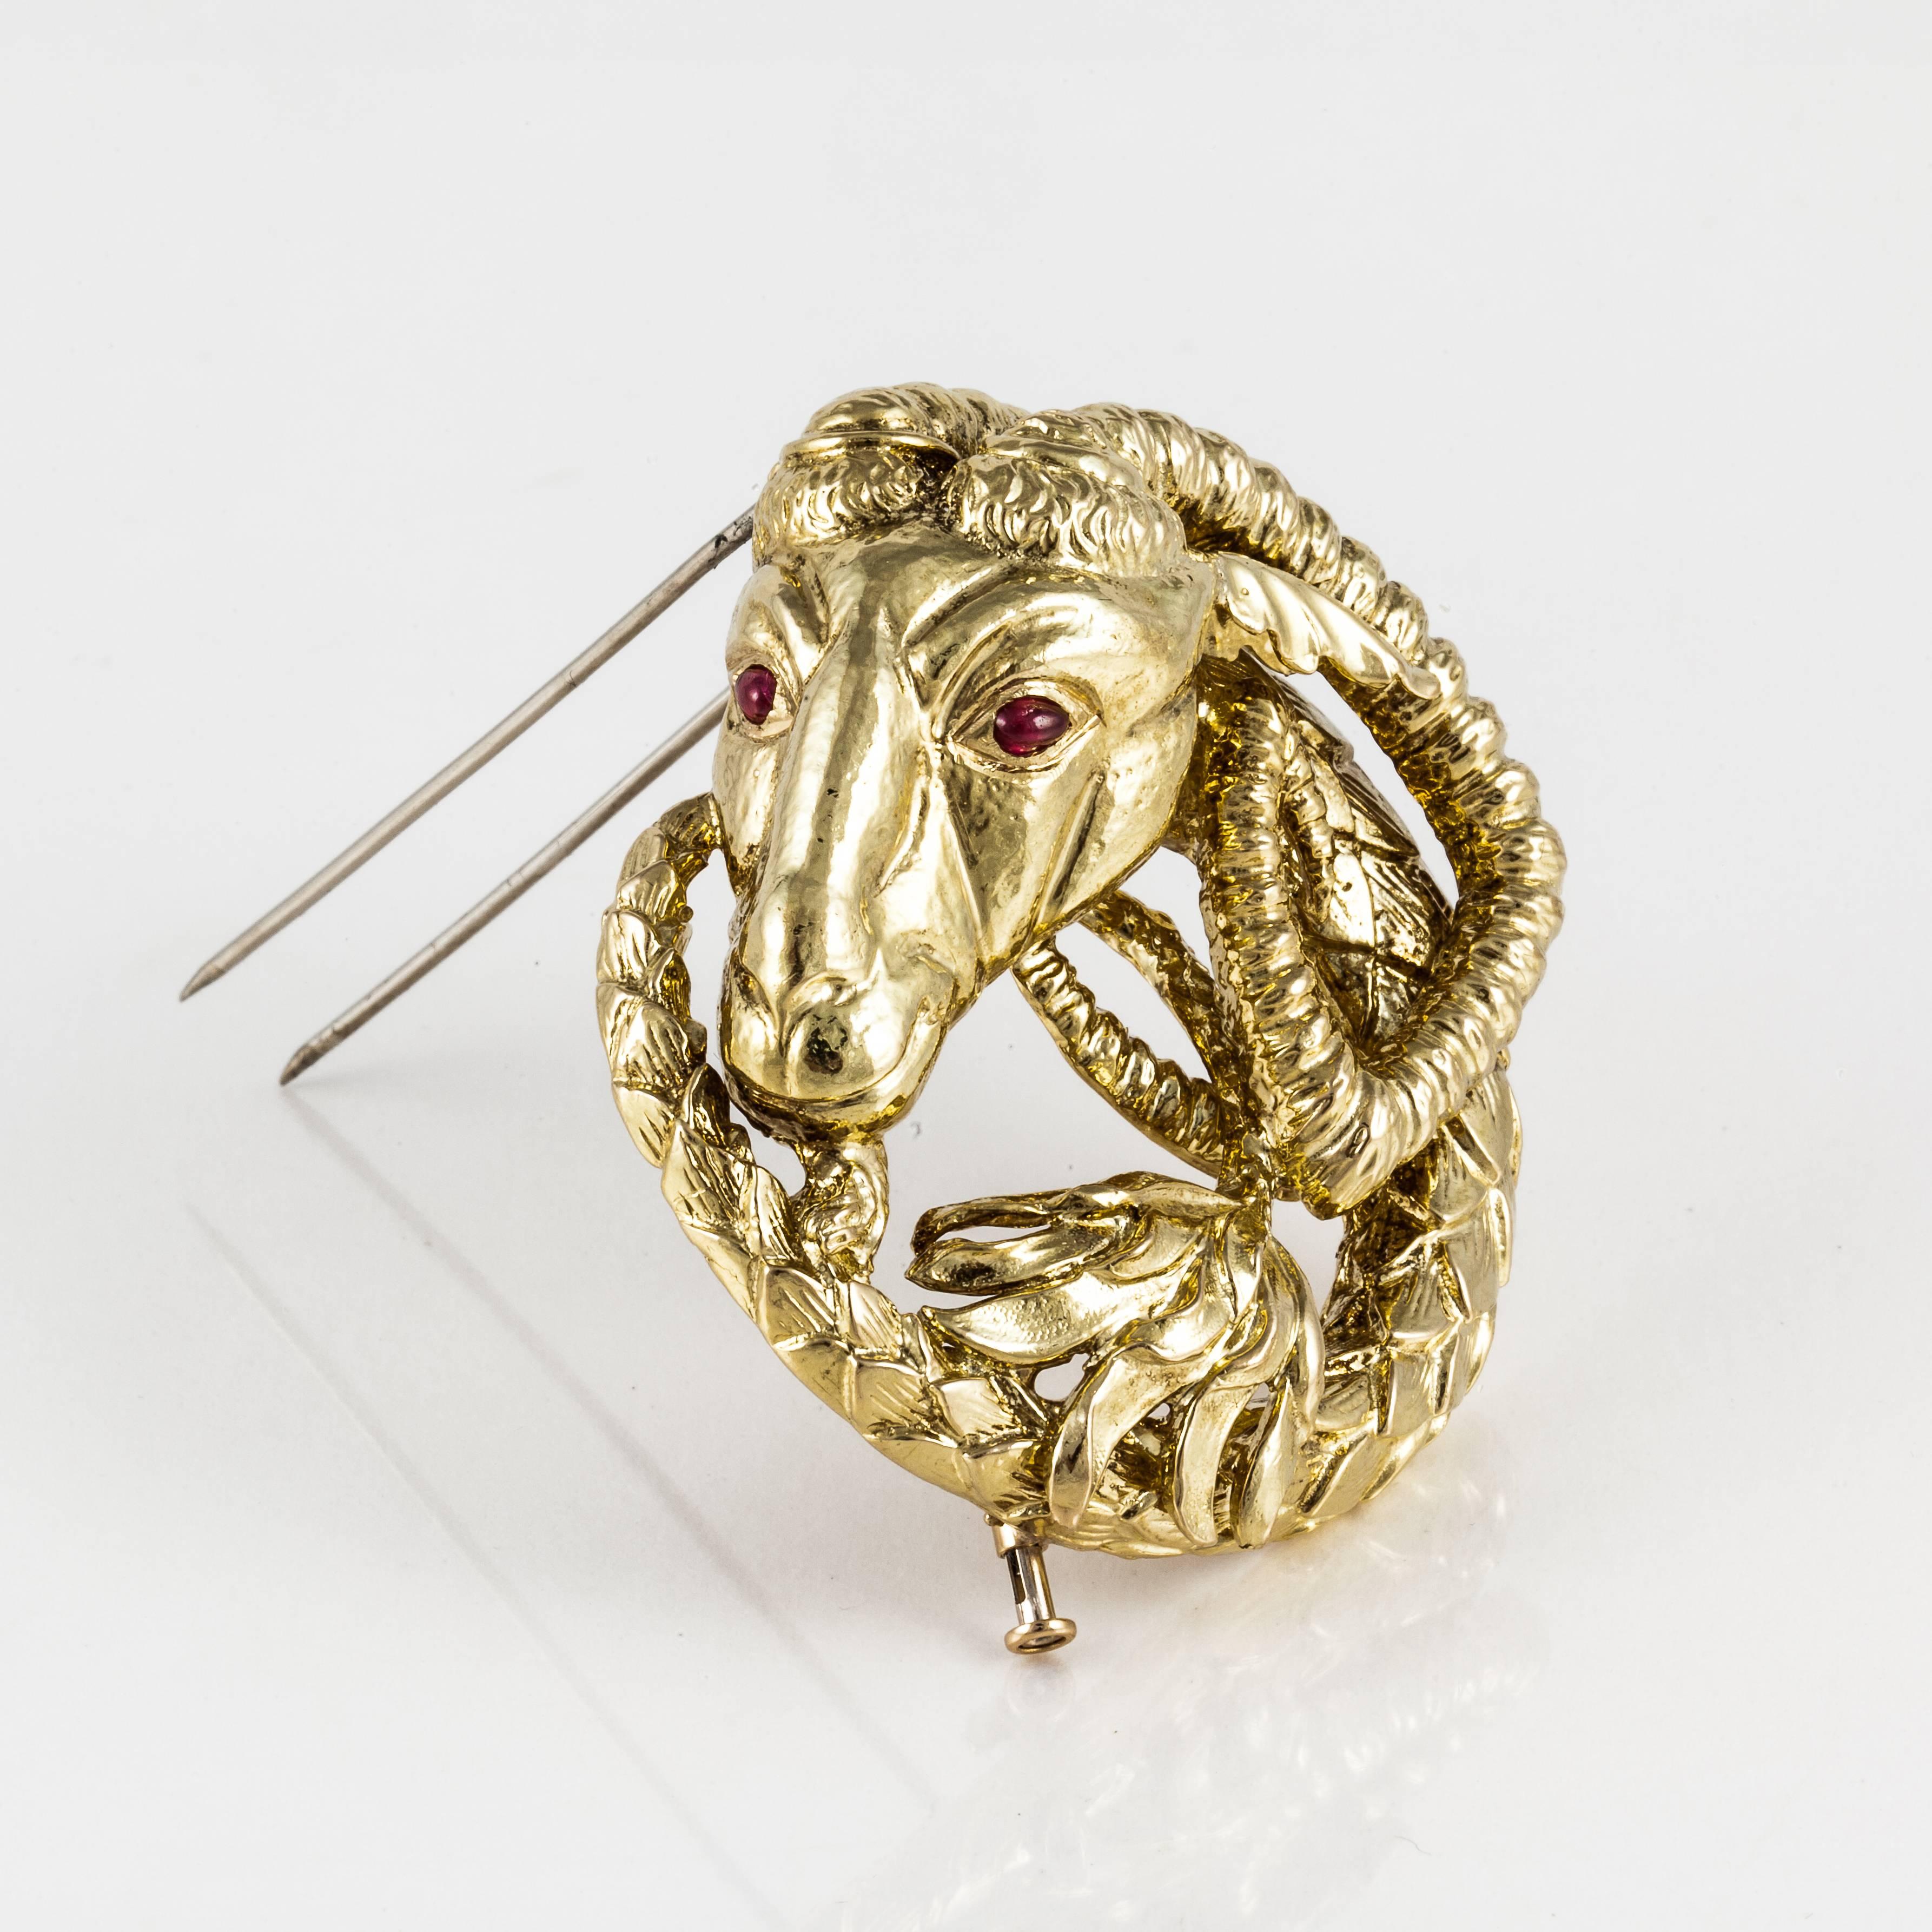 David Webb ram's head brooch in 18K yellow gold with cabochon ruby eyes.  Marked on the back 